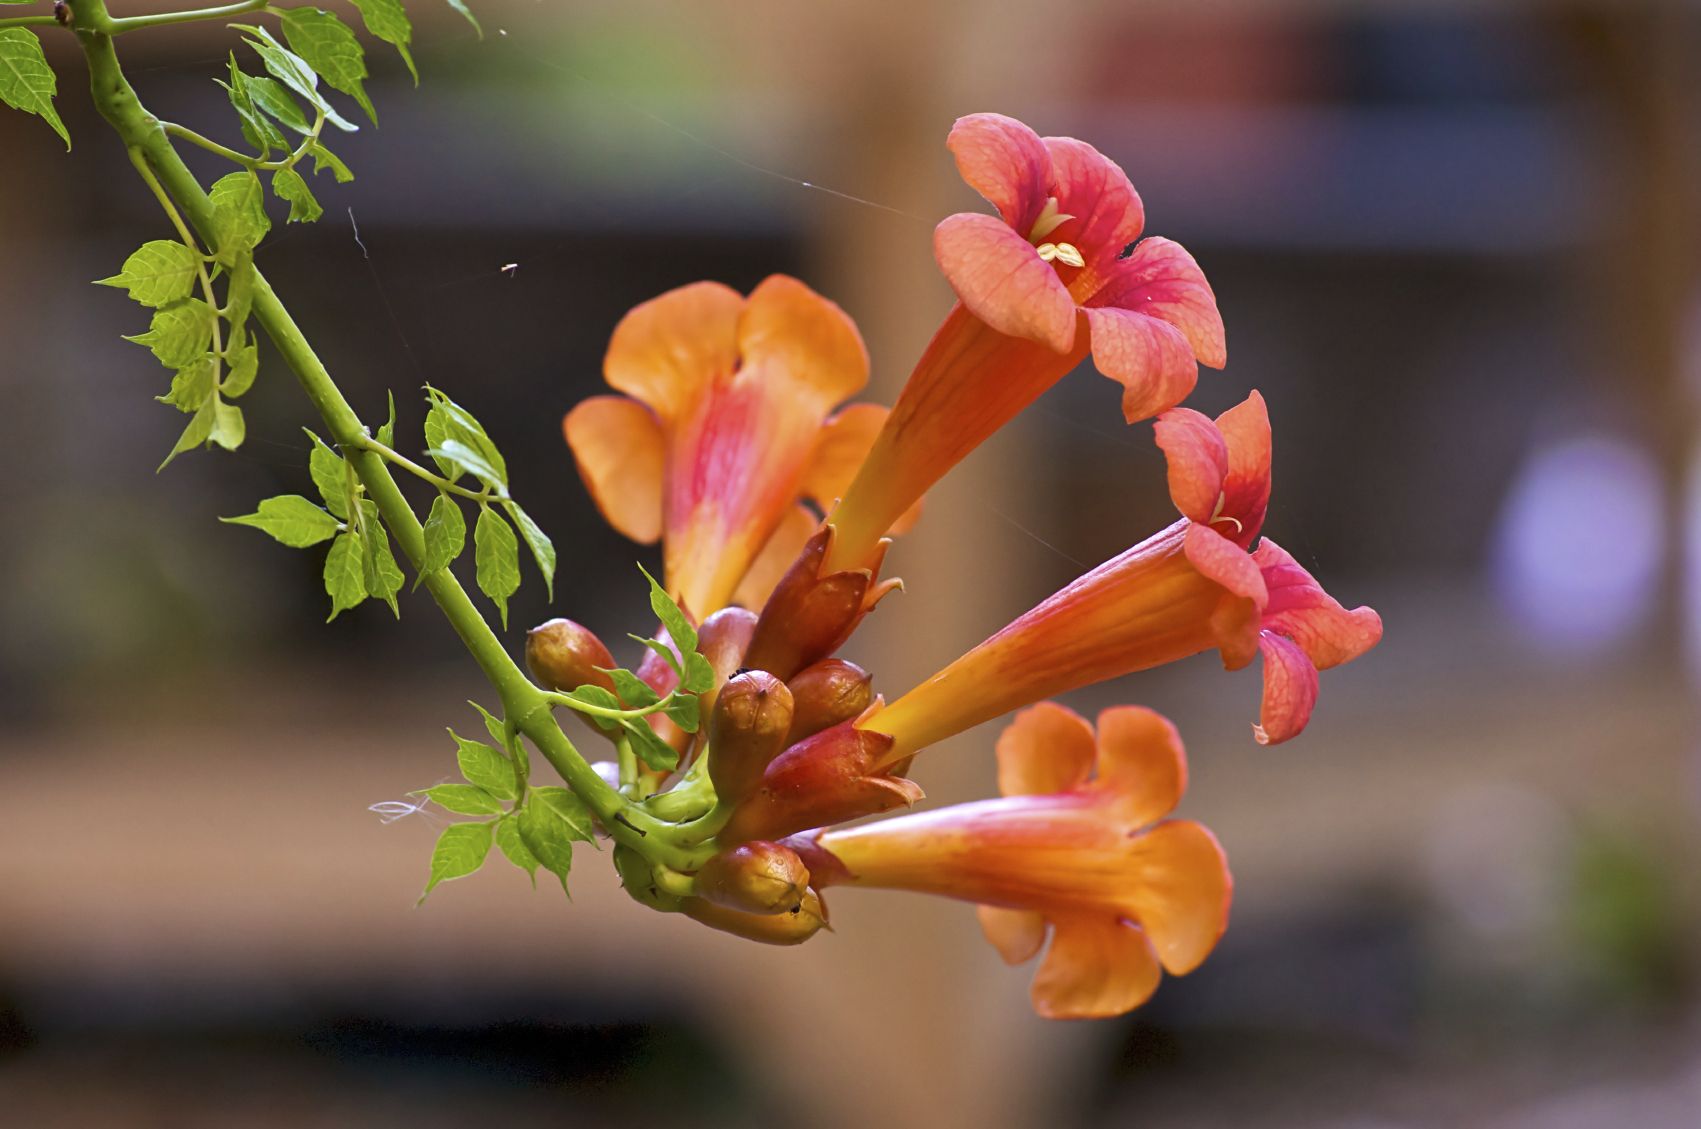 Growing Trumpet Vines – Information On The Care Of Trumpet Vines ...